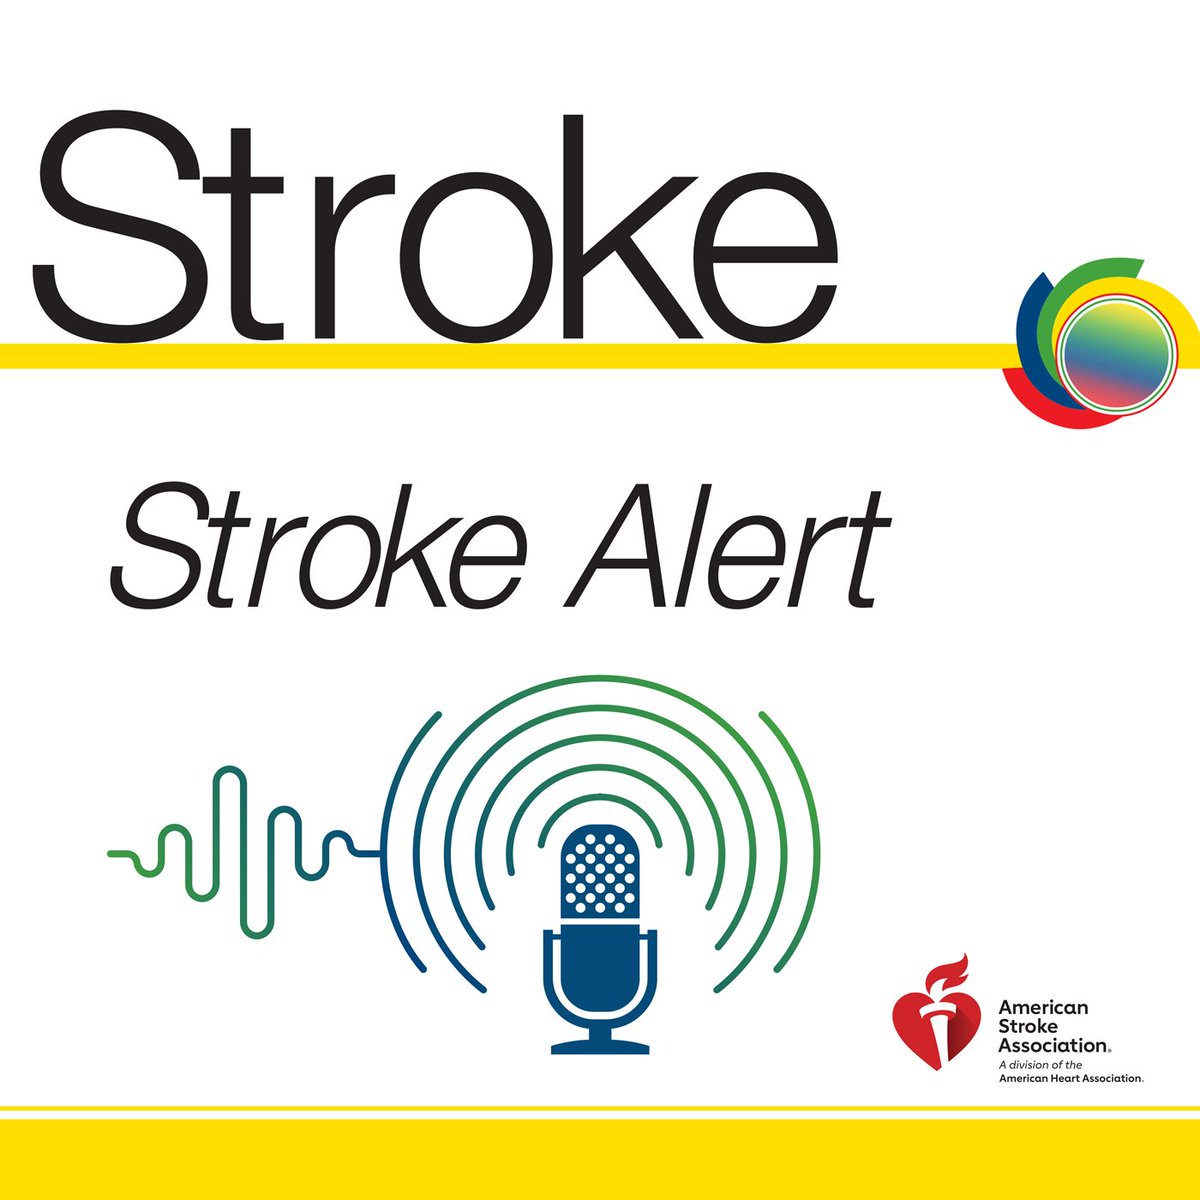 🧵The April episode of the #StrokeAlert Podcast is now available. In this episode, host @NAsdaghi highlights articles in the April issue of #Stroke and interviews @shadiyaghi2 about the STOP-CAD Study. ahajournals.org/do/10.1161/pod…